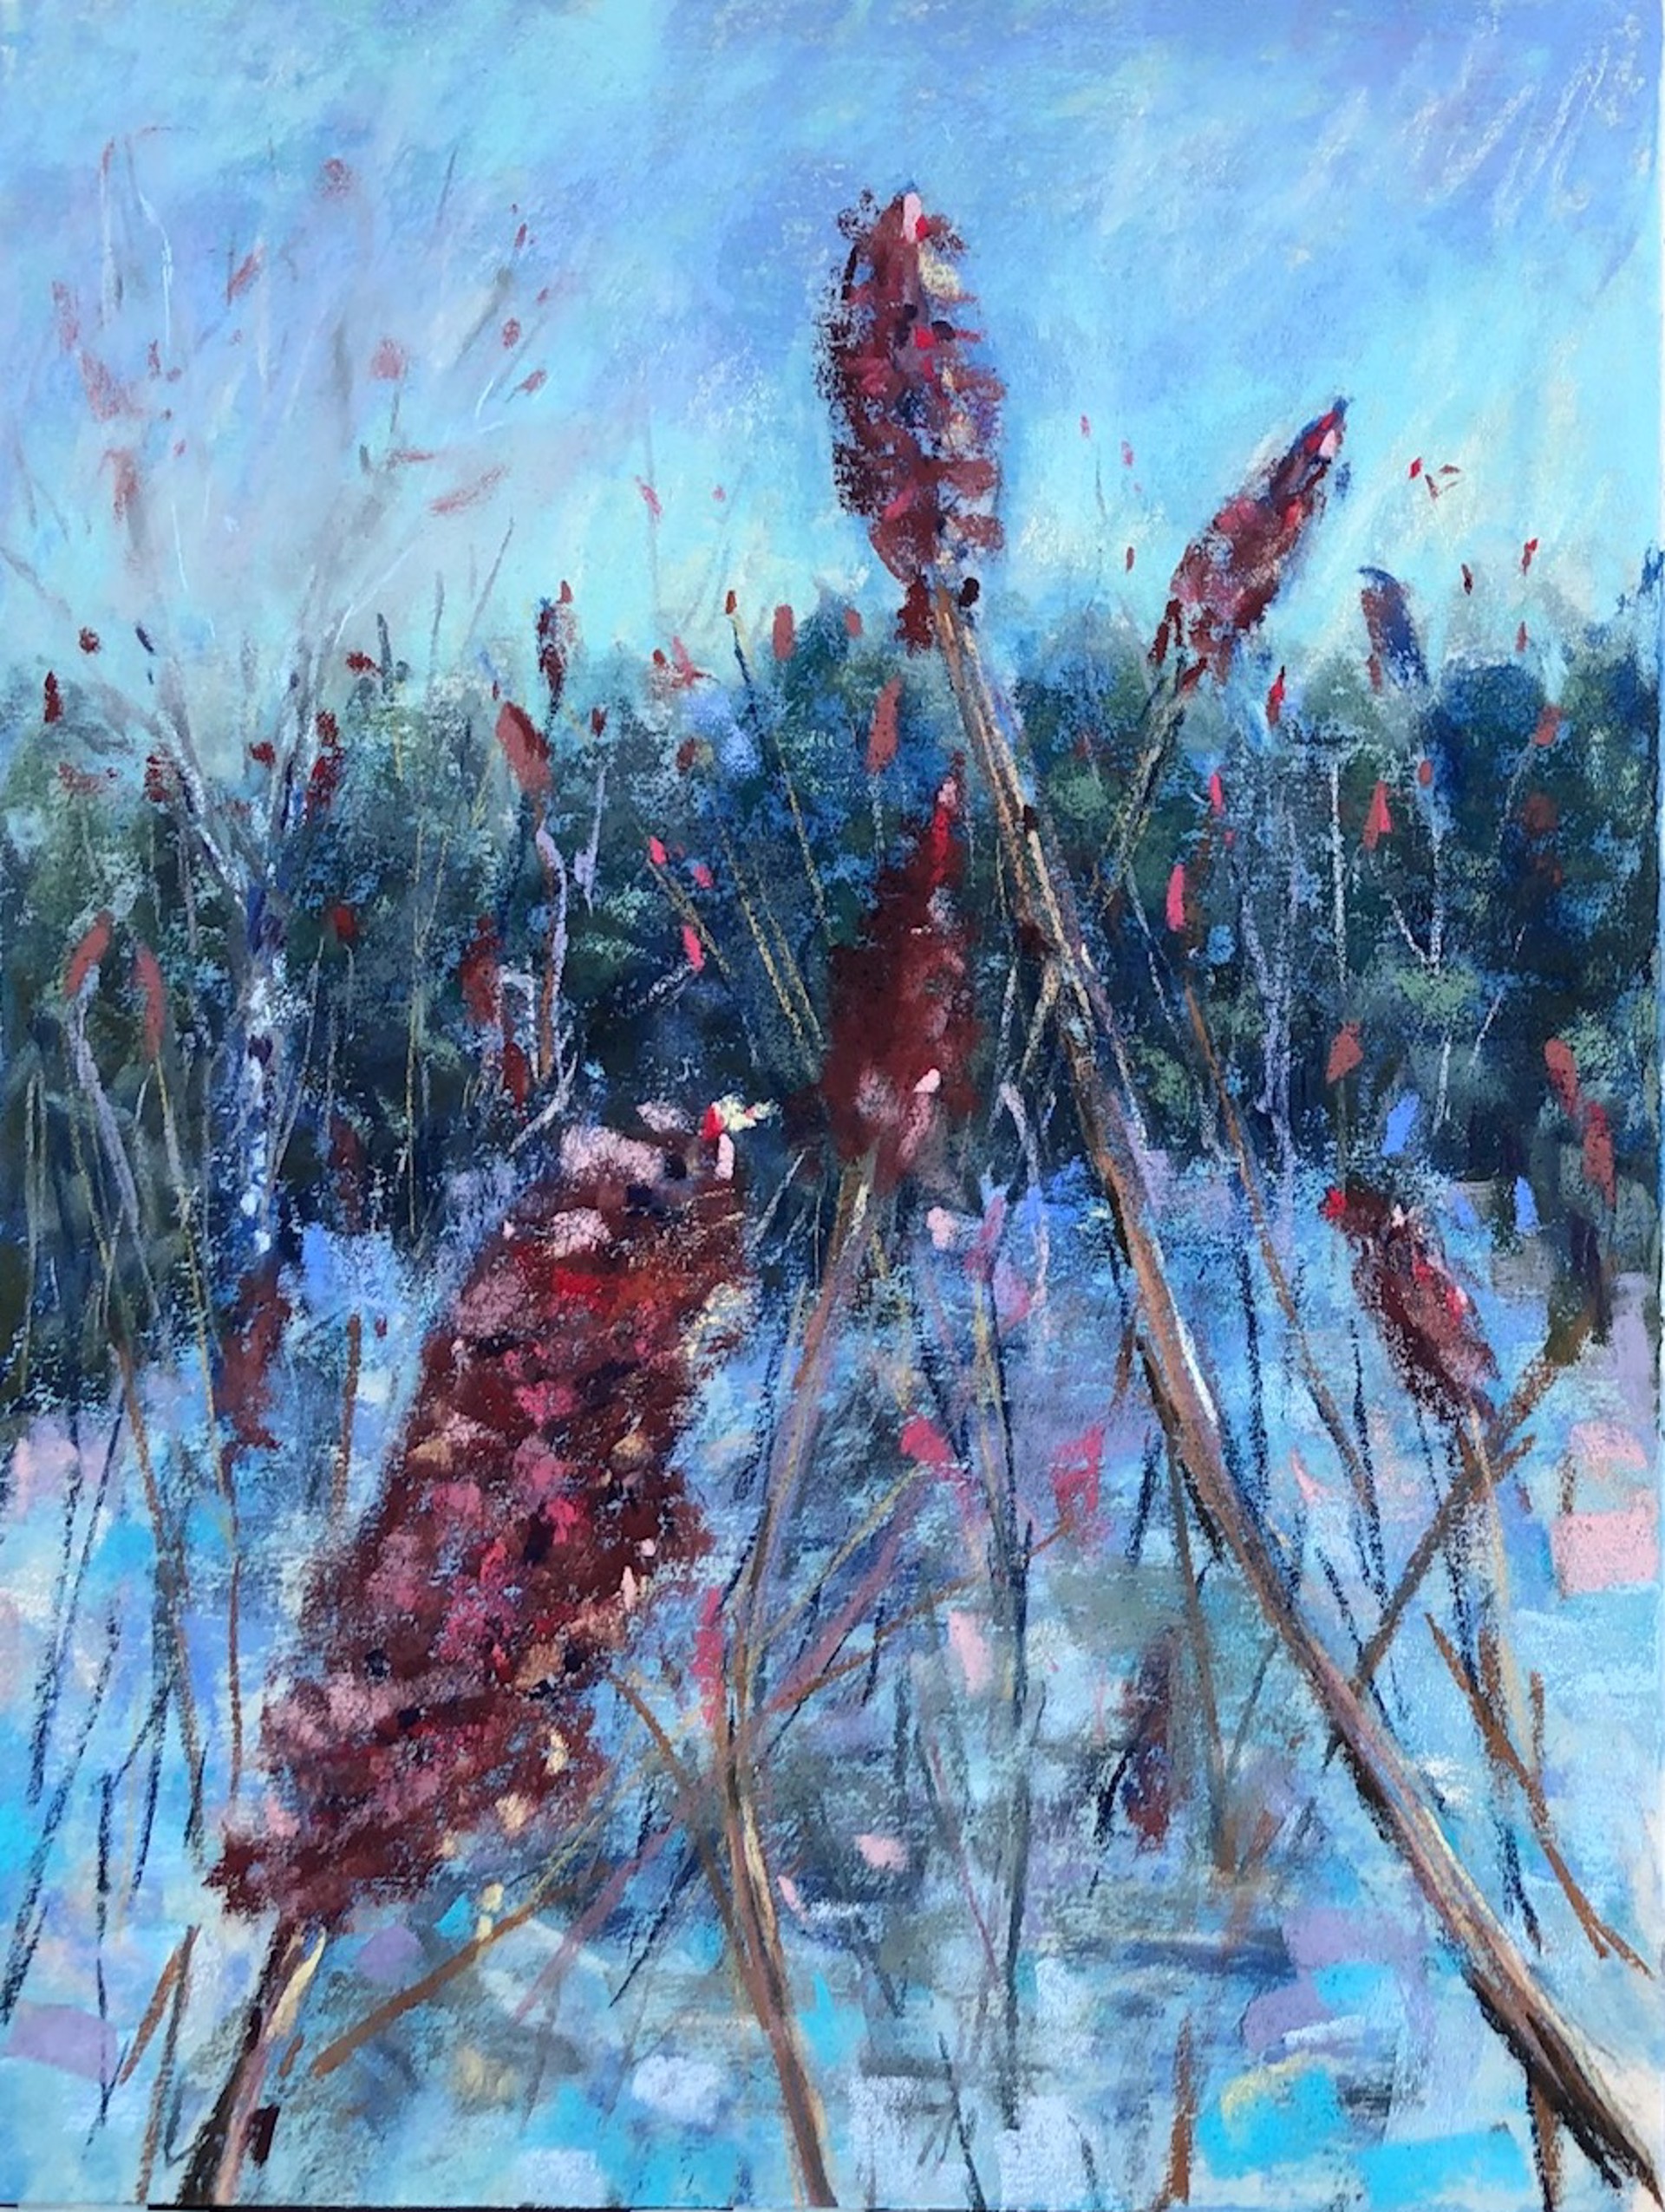 Sumac 2 by Carrie Ruddy